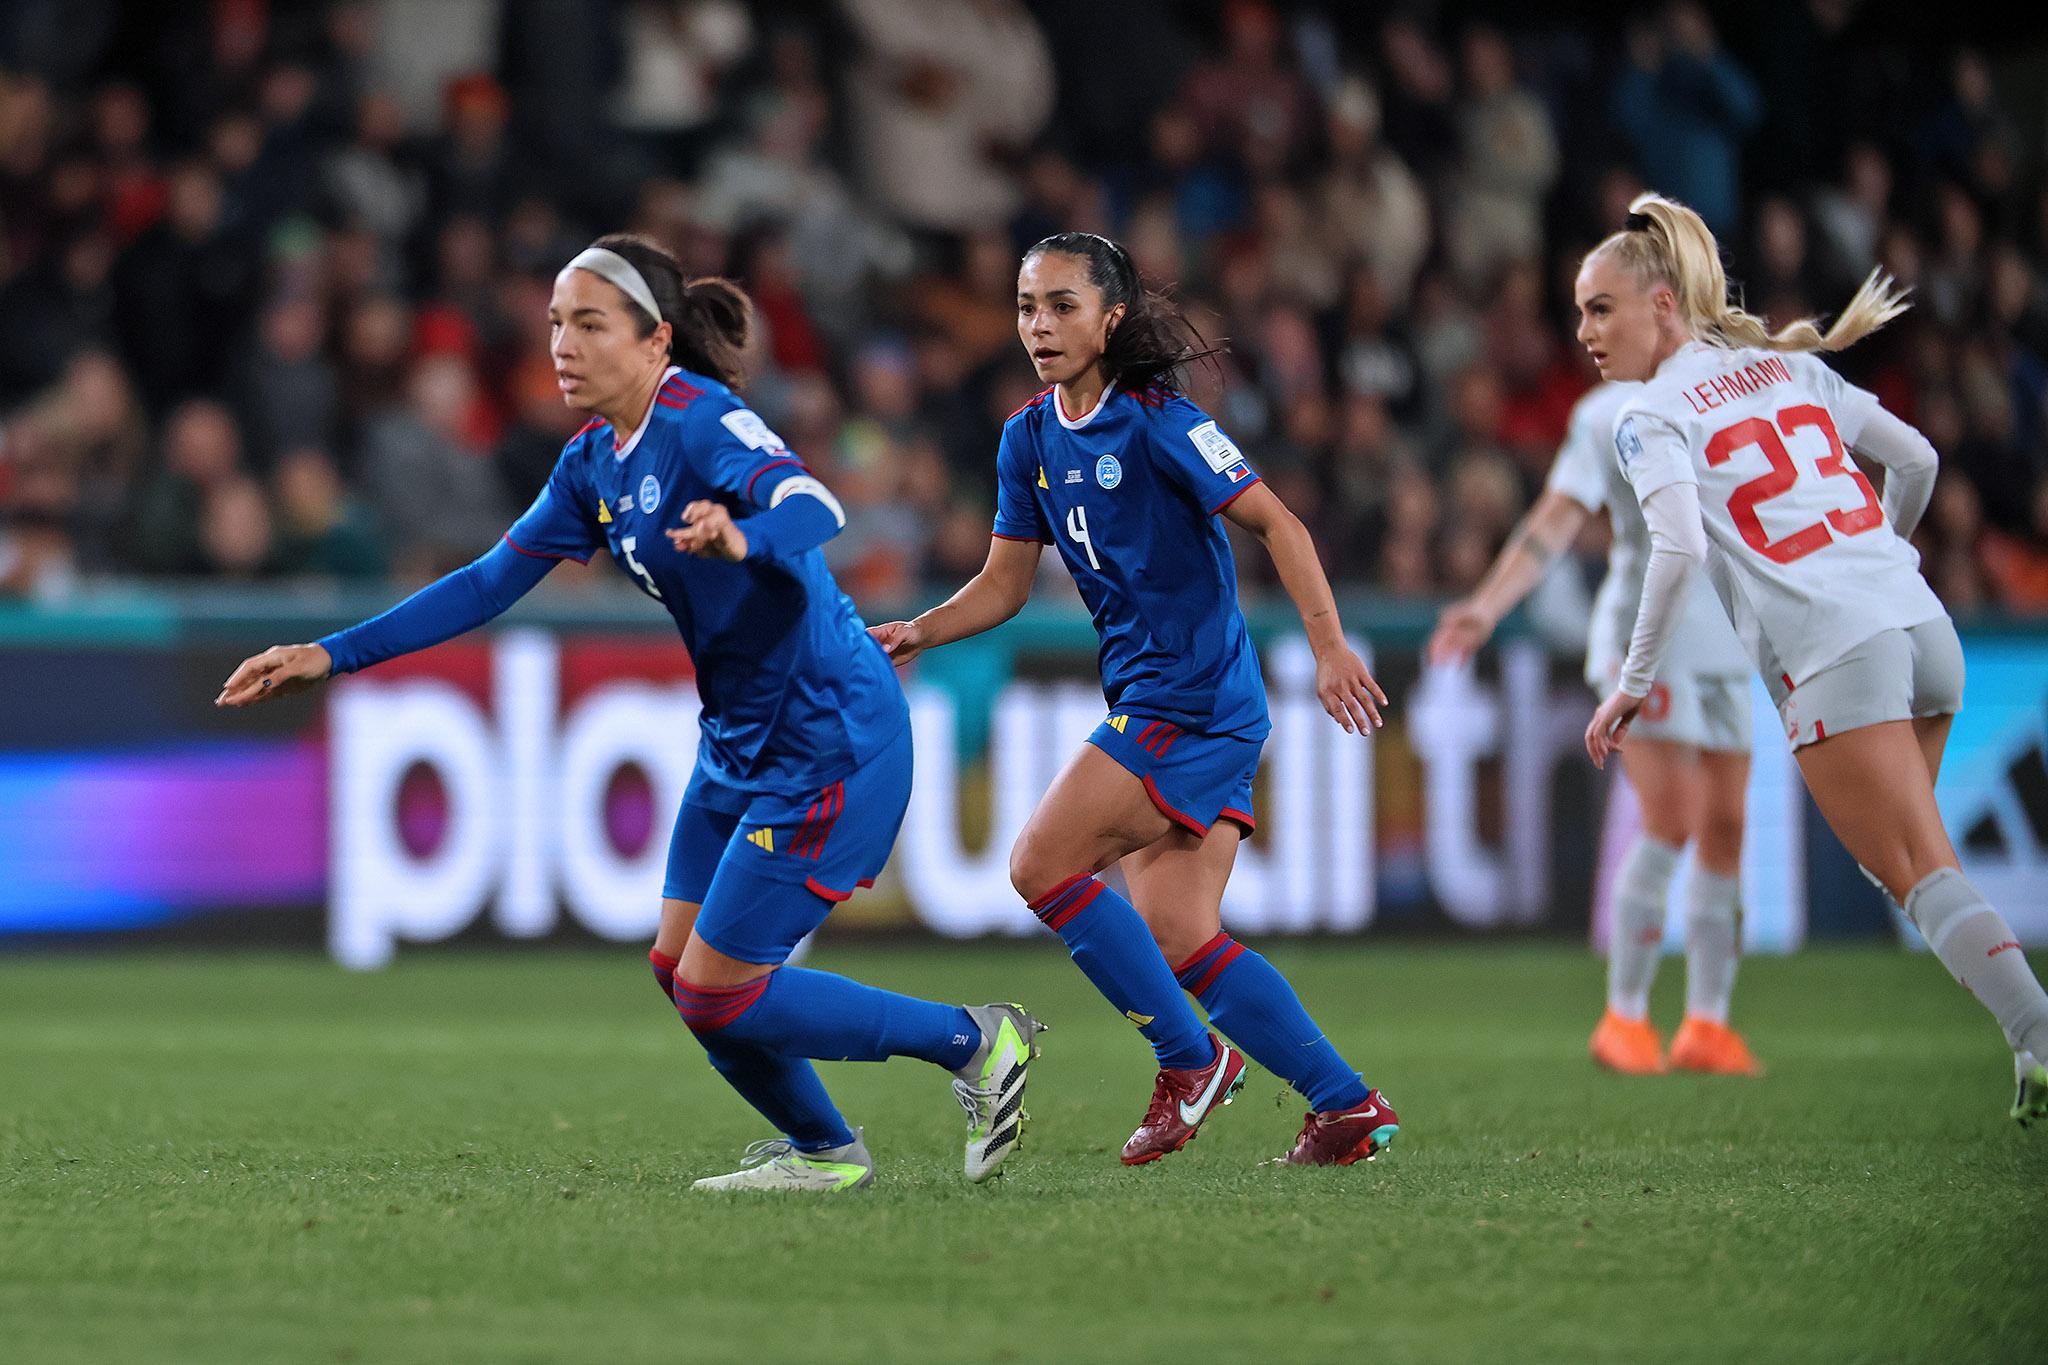 Filipinas’ coach Stajcic hopes team continues to be competitive in next Women’s World Cup match thumbnail